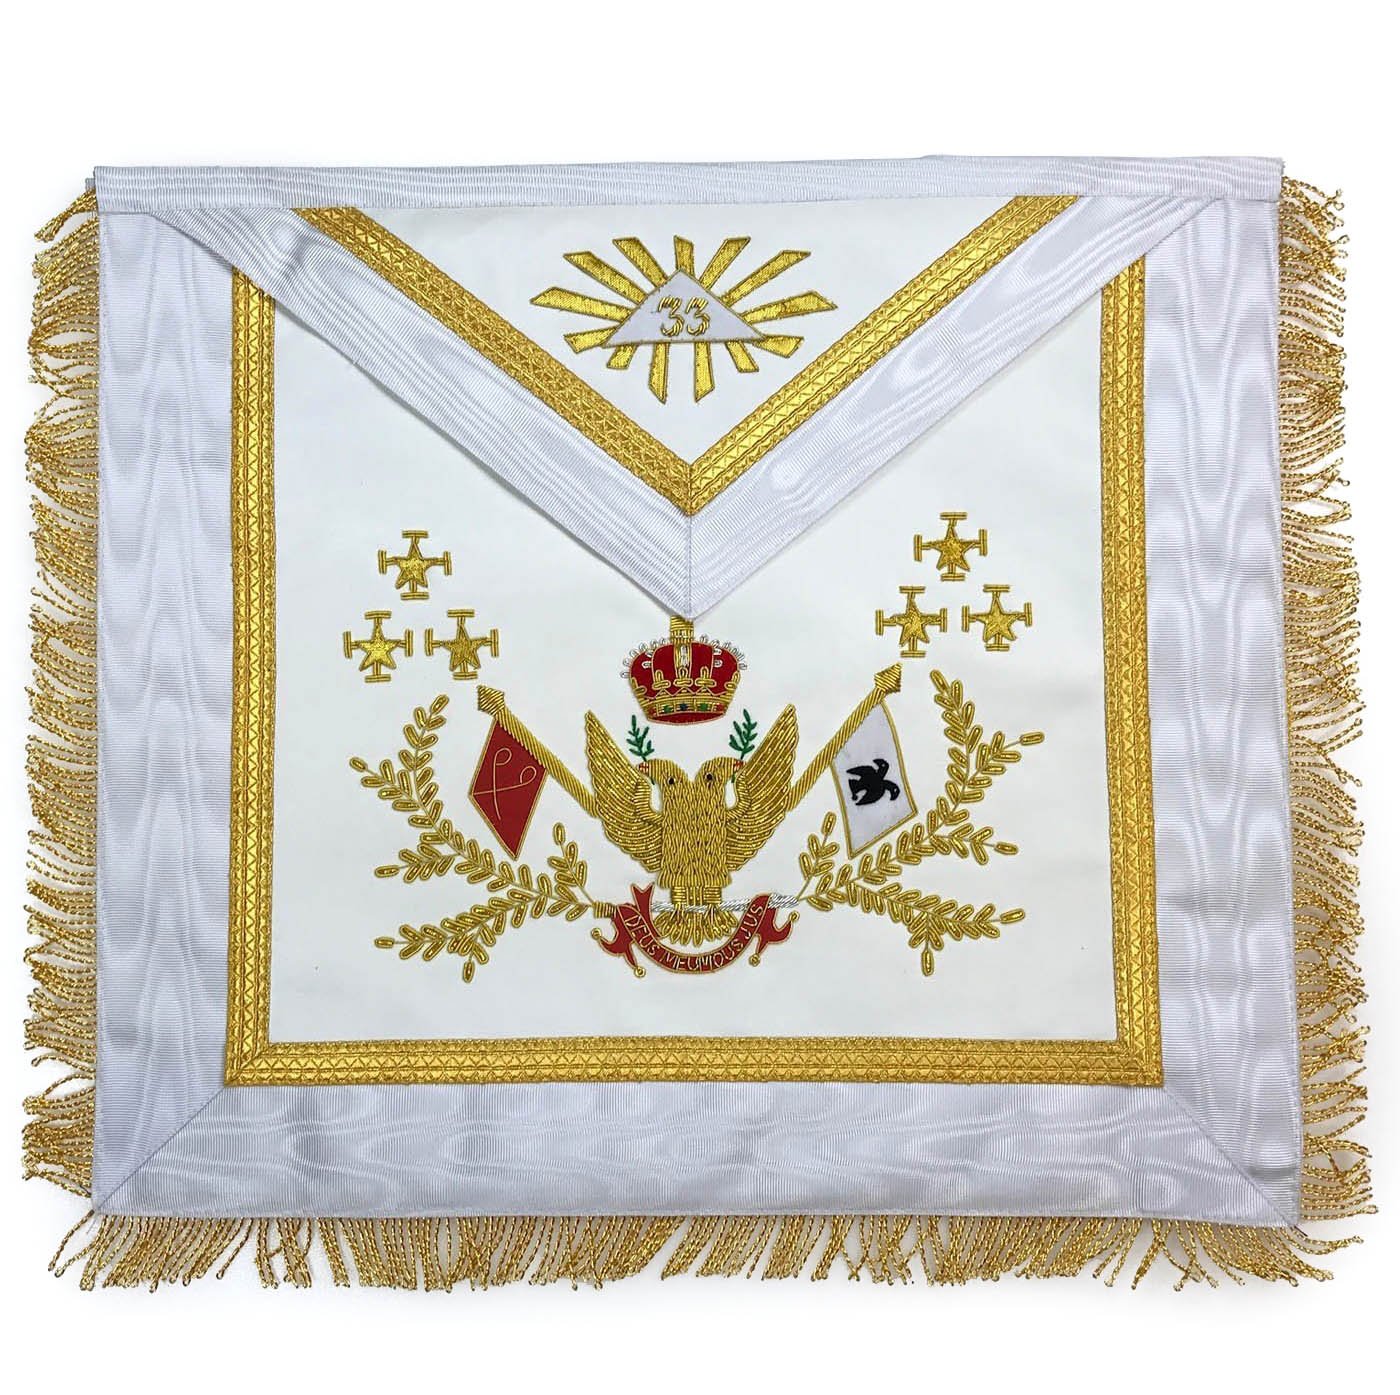 33rd Degree Scottish Rite Regalia Set - WINGS UP All Countries Flags Hand Embroidered - Bricks Masons